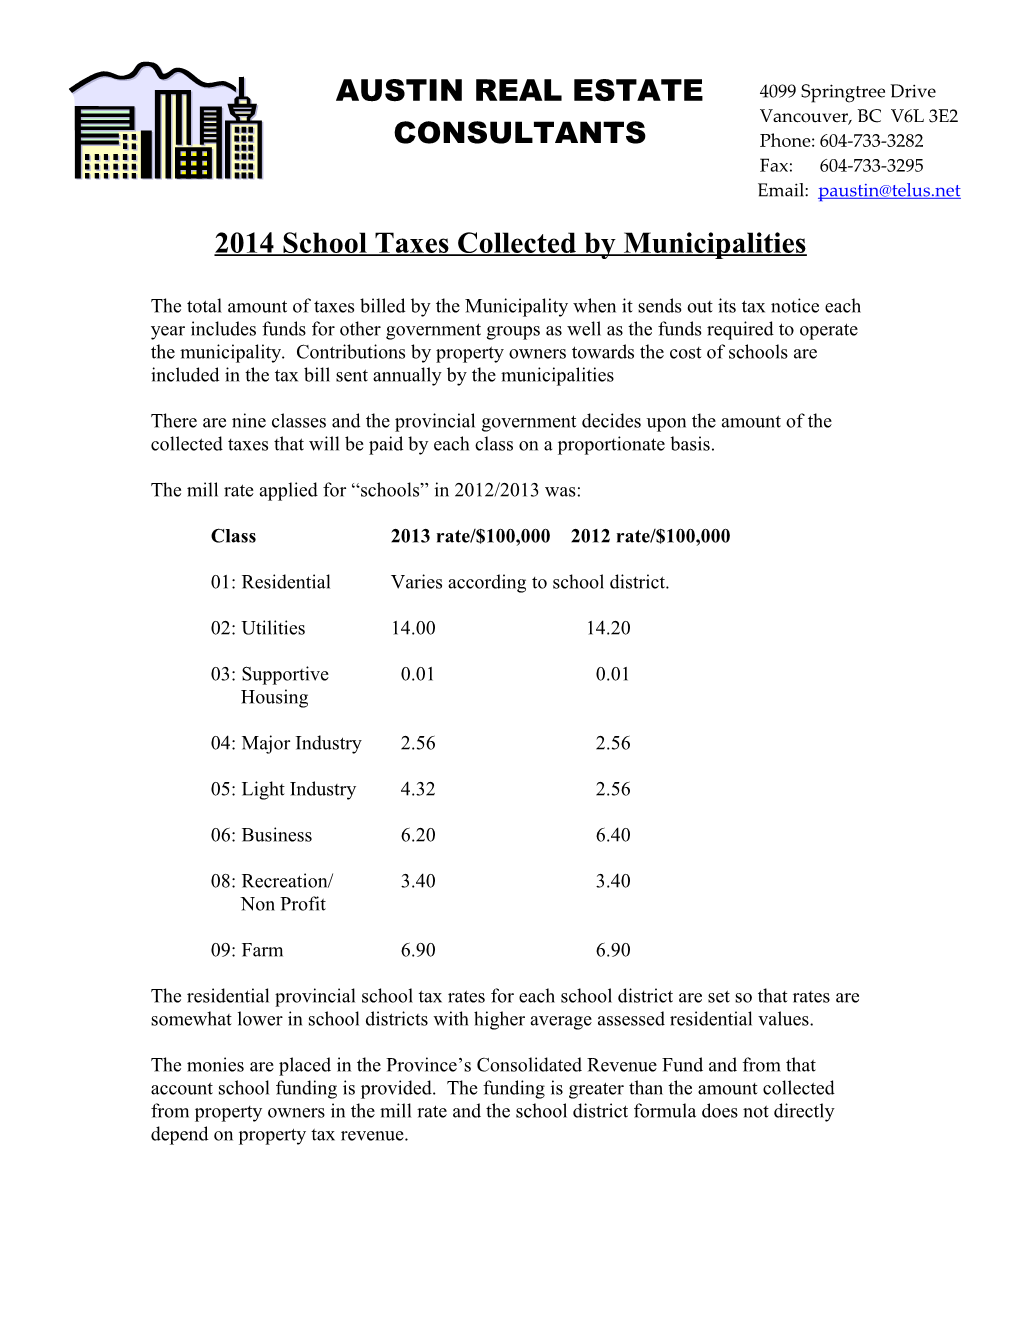 2014 School Taxes Collected by Municipalities